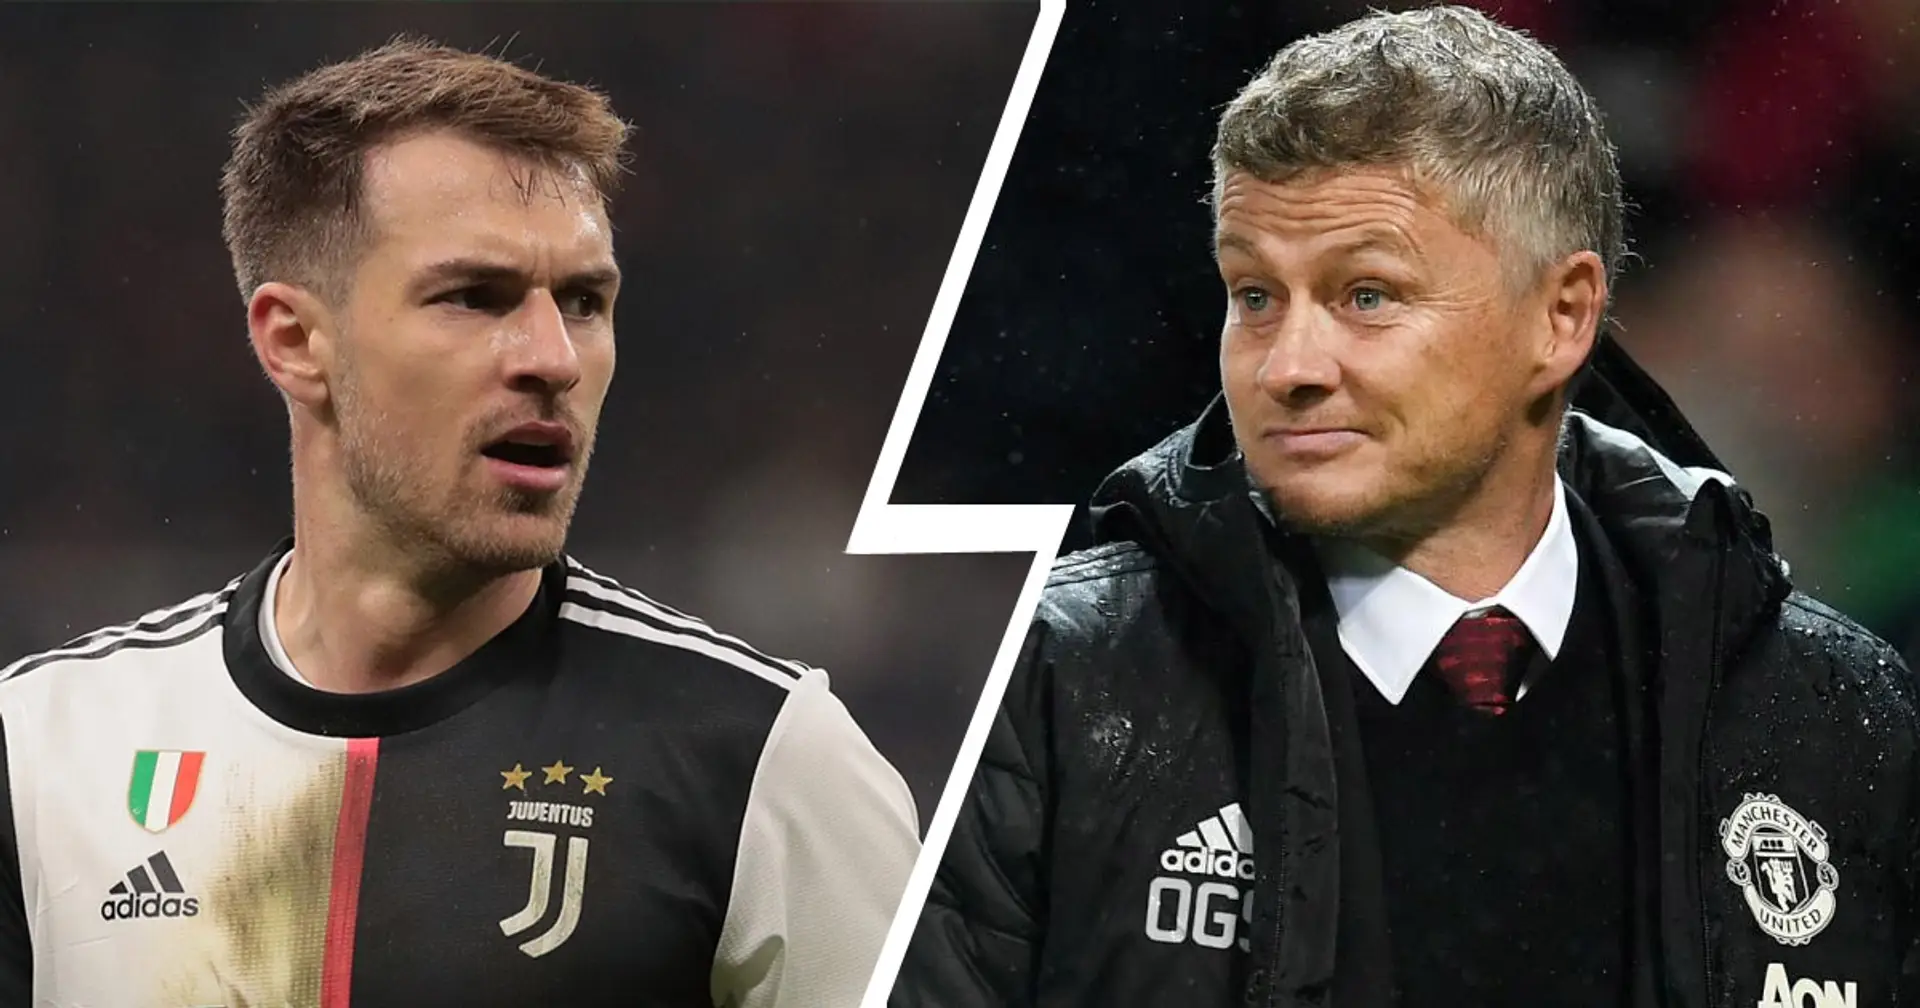 Ramsey-to-United rumours gain traction as Juventus reportedly willing to use Aaron as a bargaining chip to get Pogba